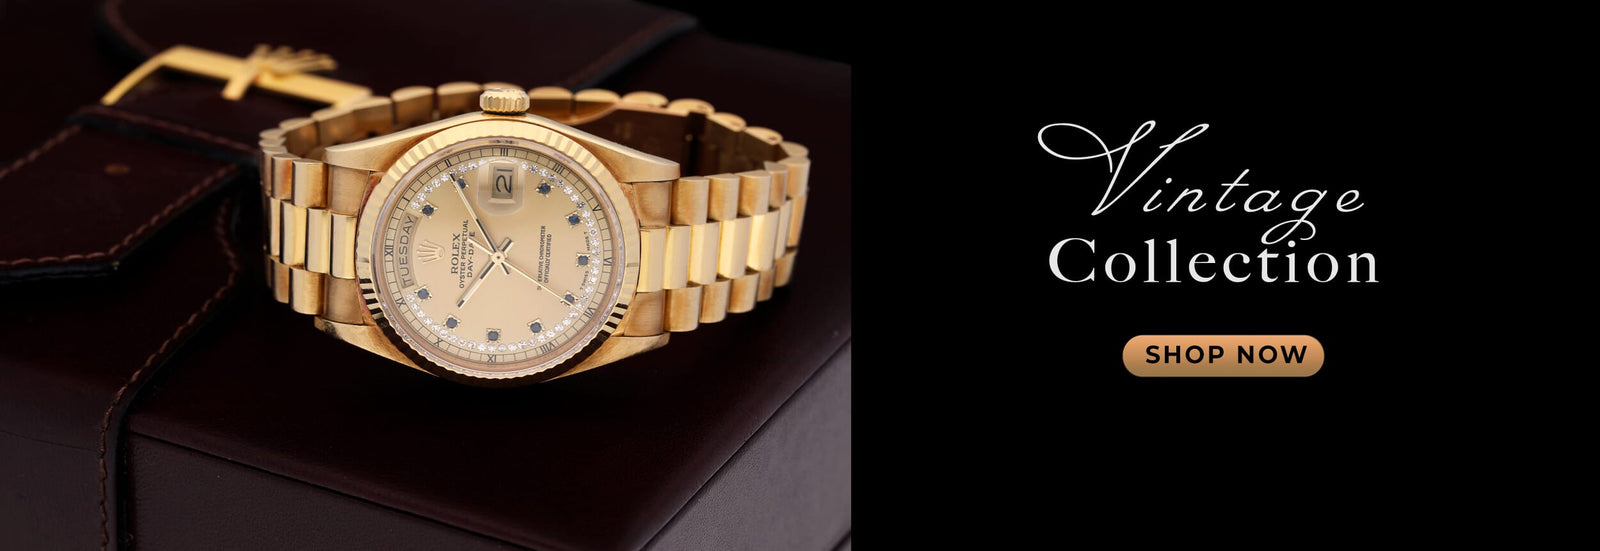 Pre-Owned Luxury Watches Online, Buy, Sell, Trade Rolex Patek Panerai